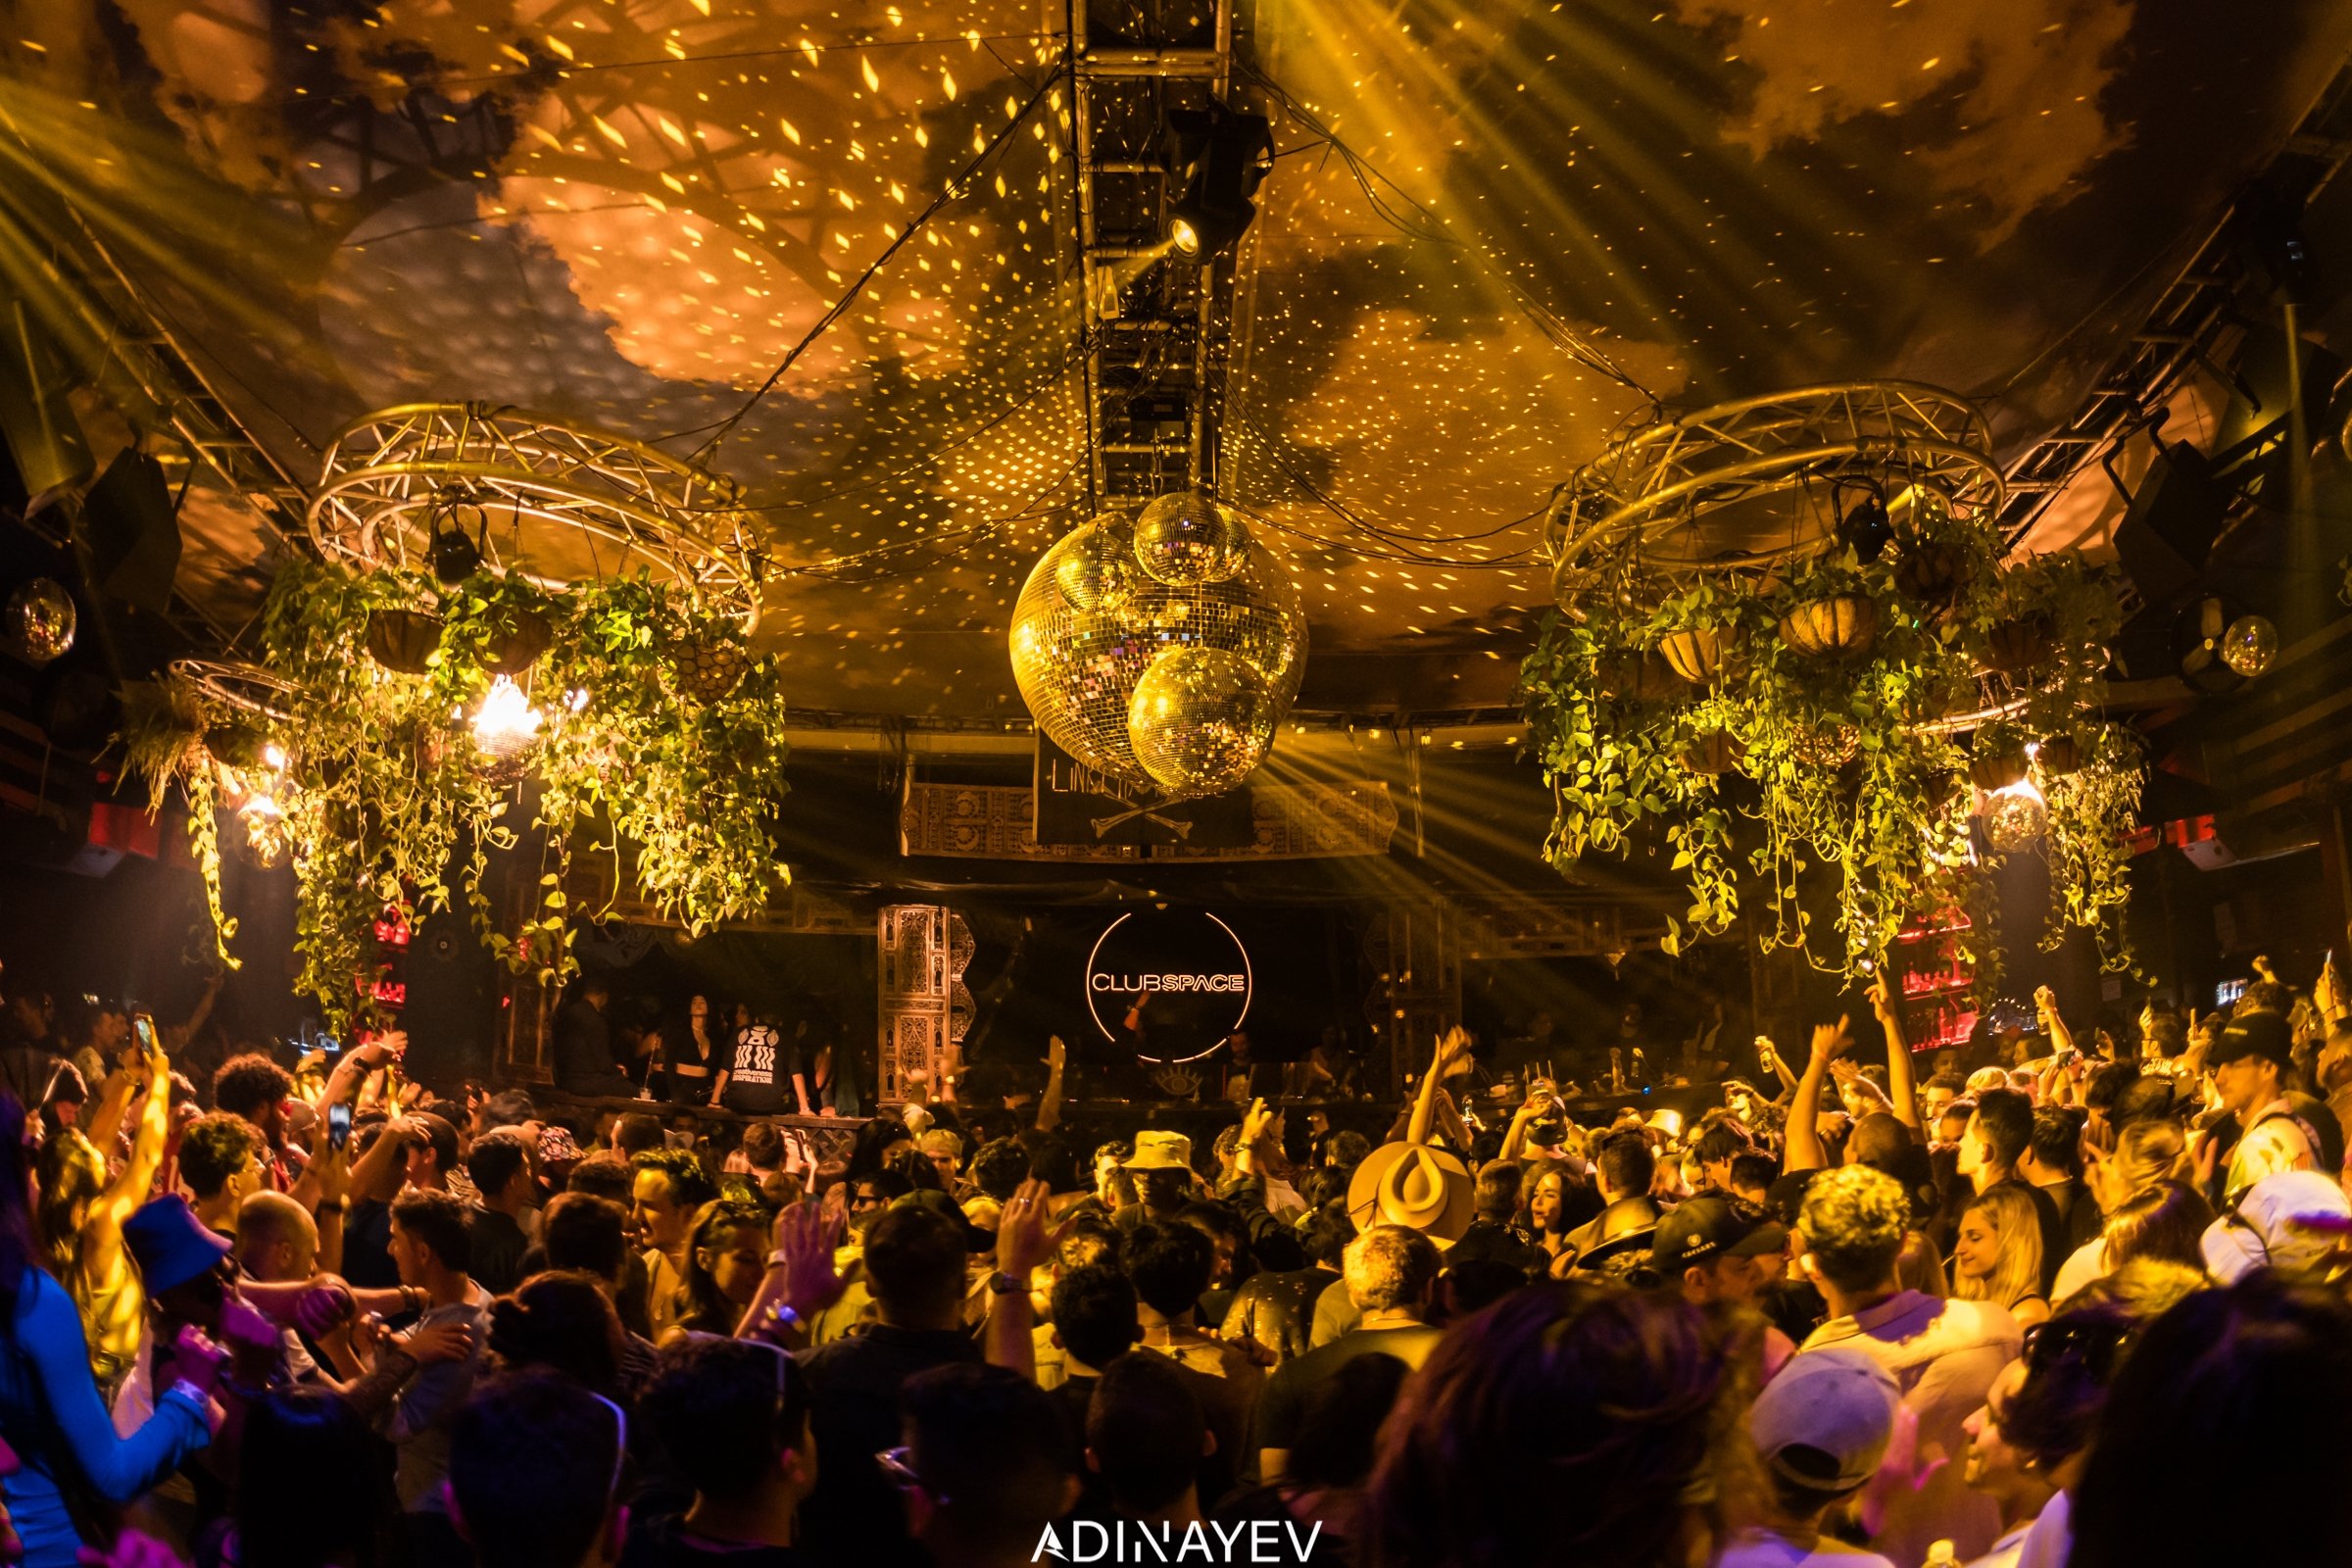 Club Space Miami · Upcoming Events & Tickets